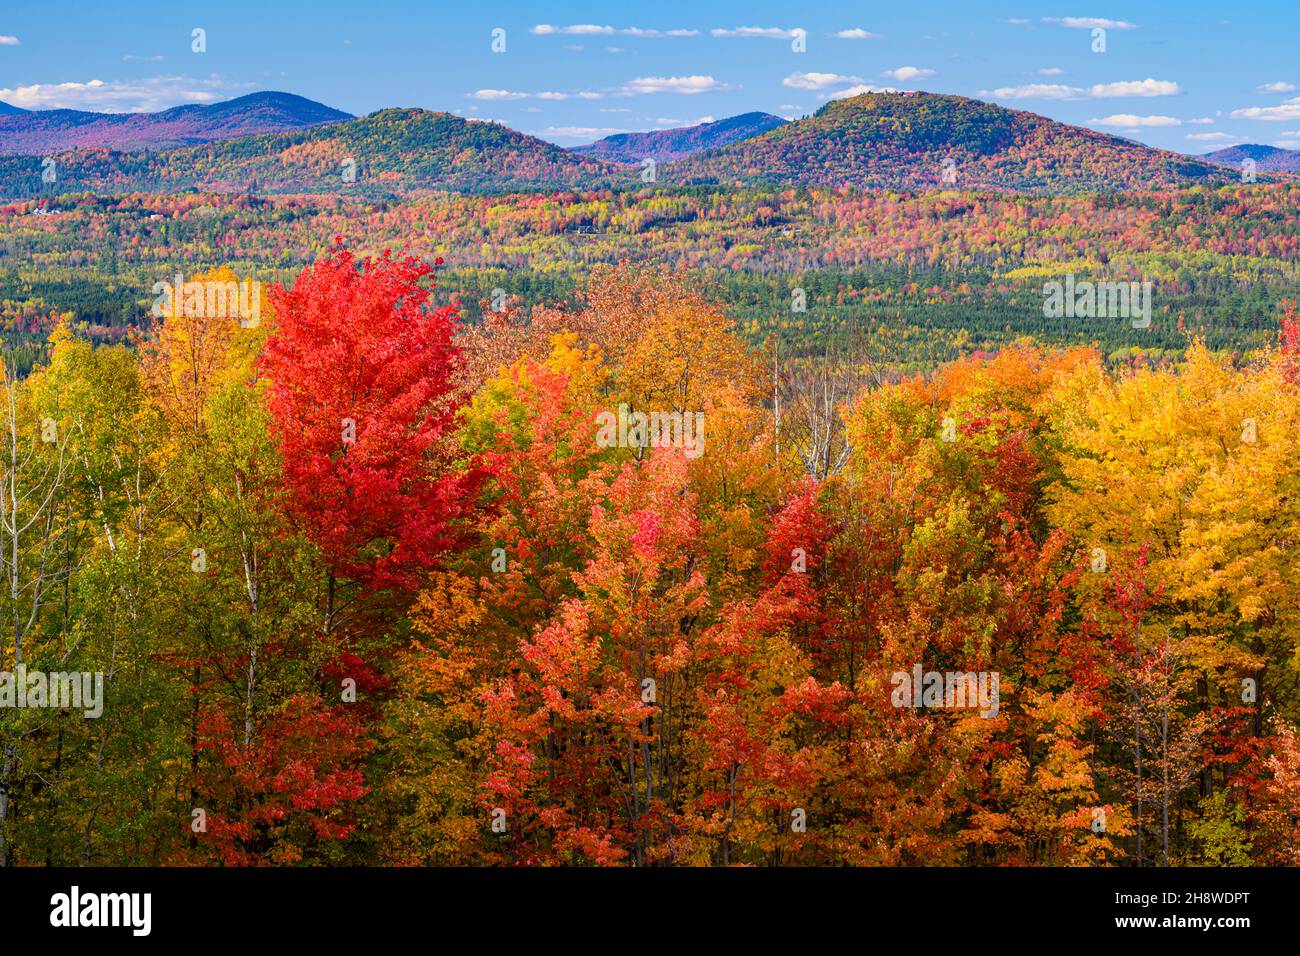 Autumn foliage in the deciduous forest on New England hillsides, White Mountains National Forest, New Hampshire, USA Stock Photo